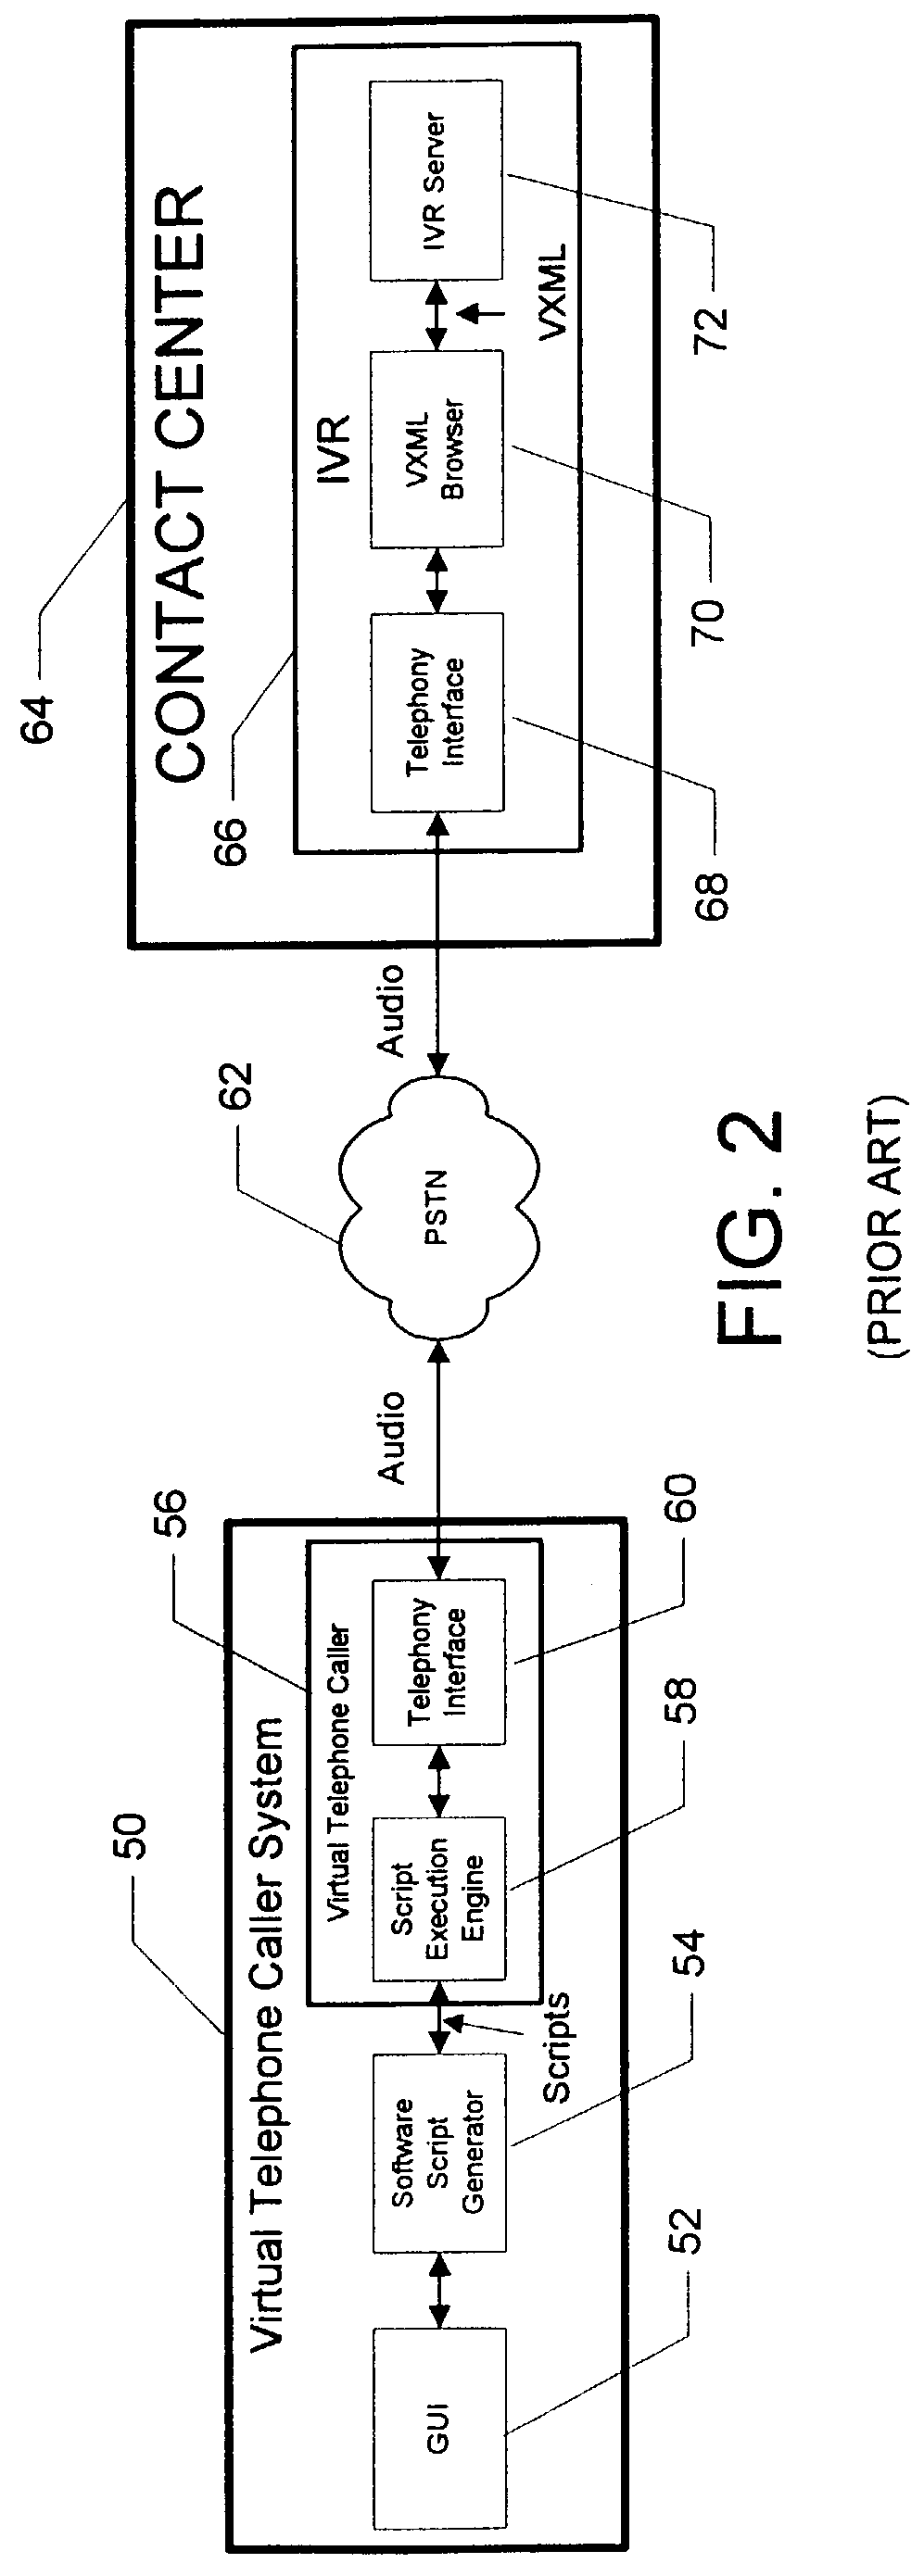 Method of generating test scripts using a voice-capable markup language